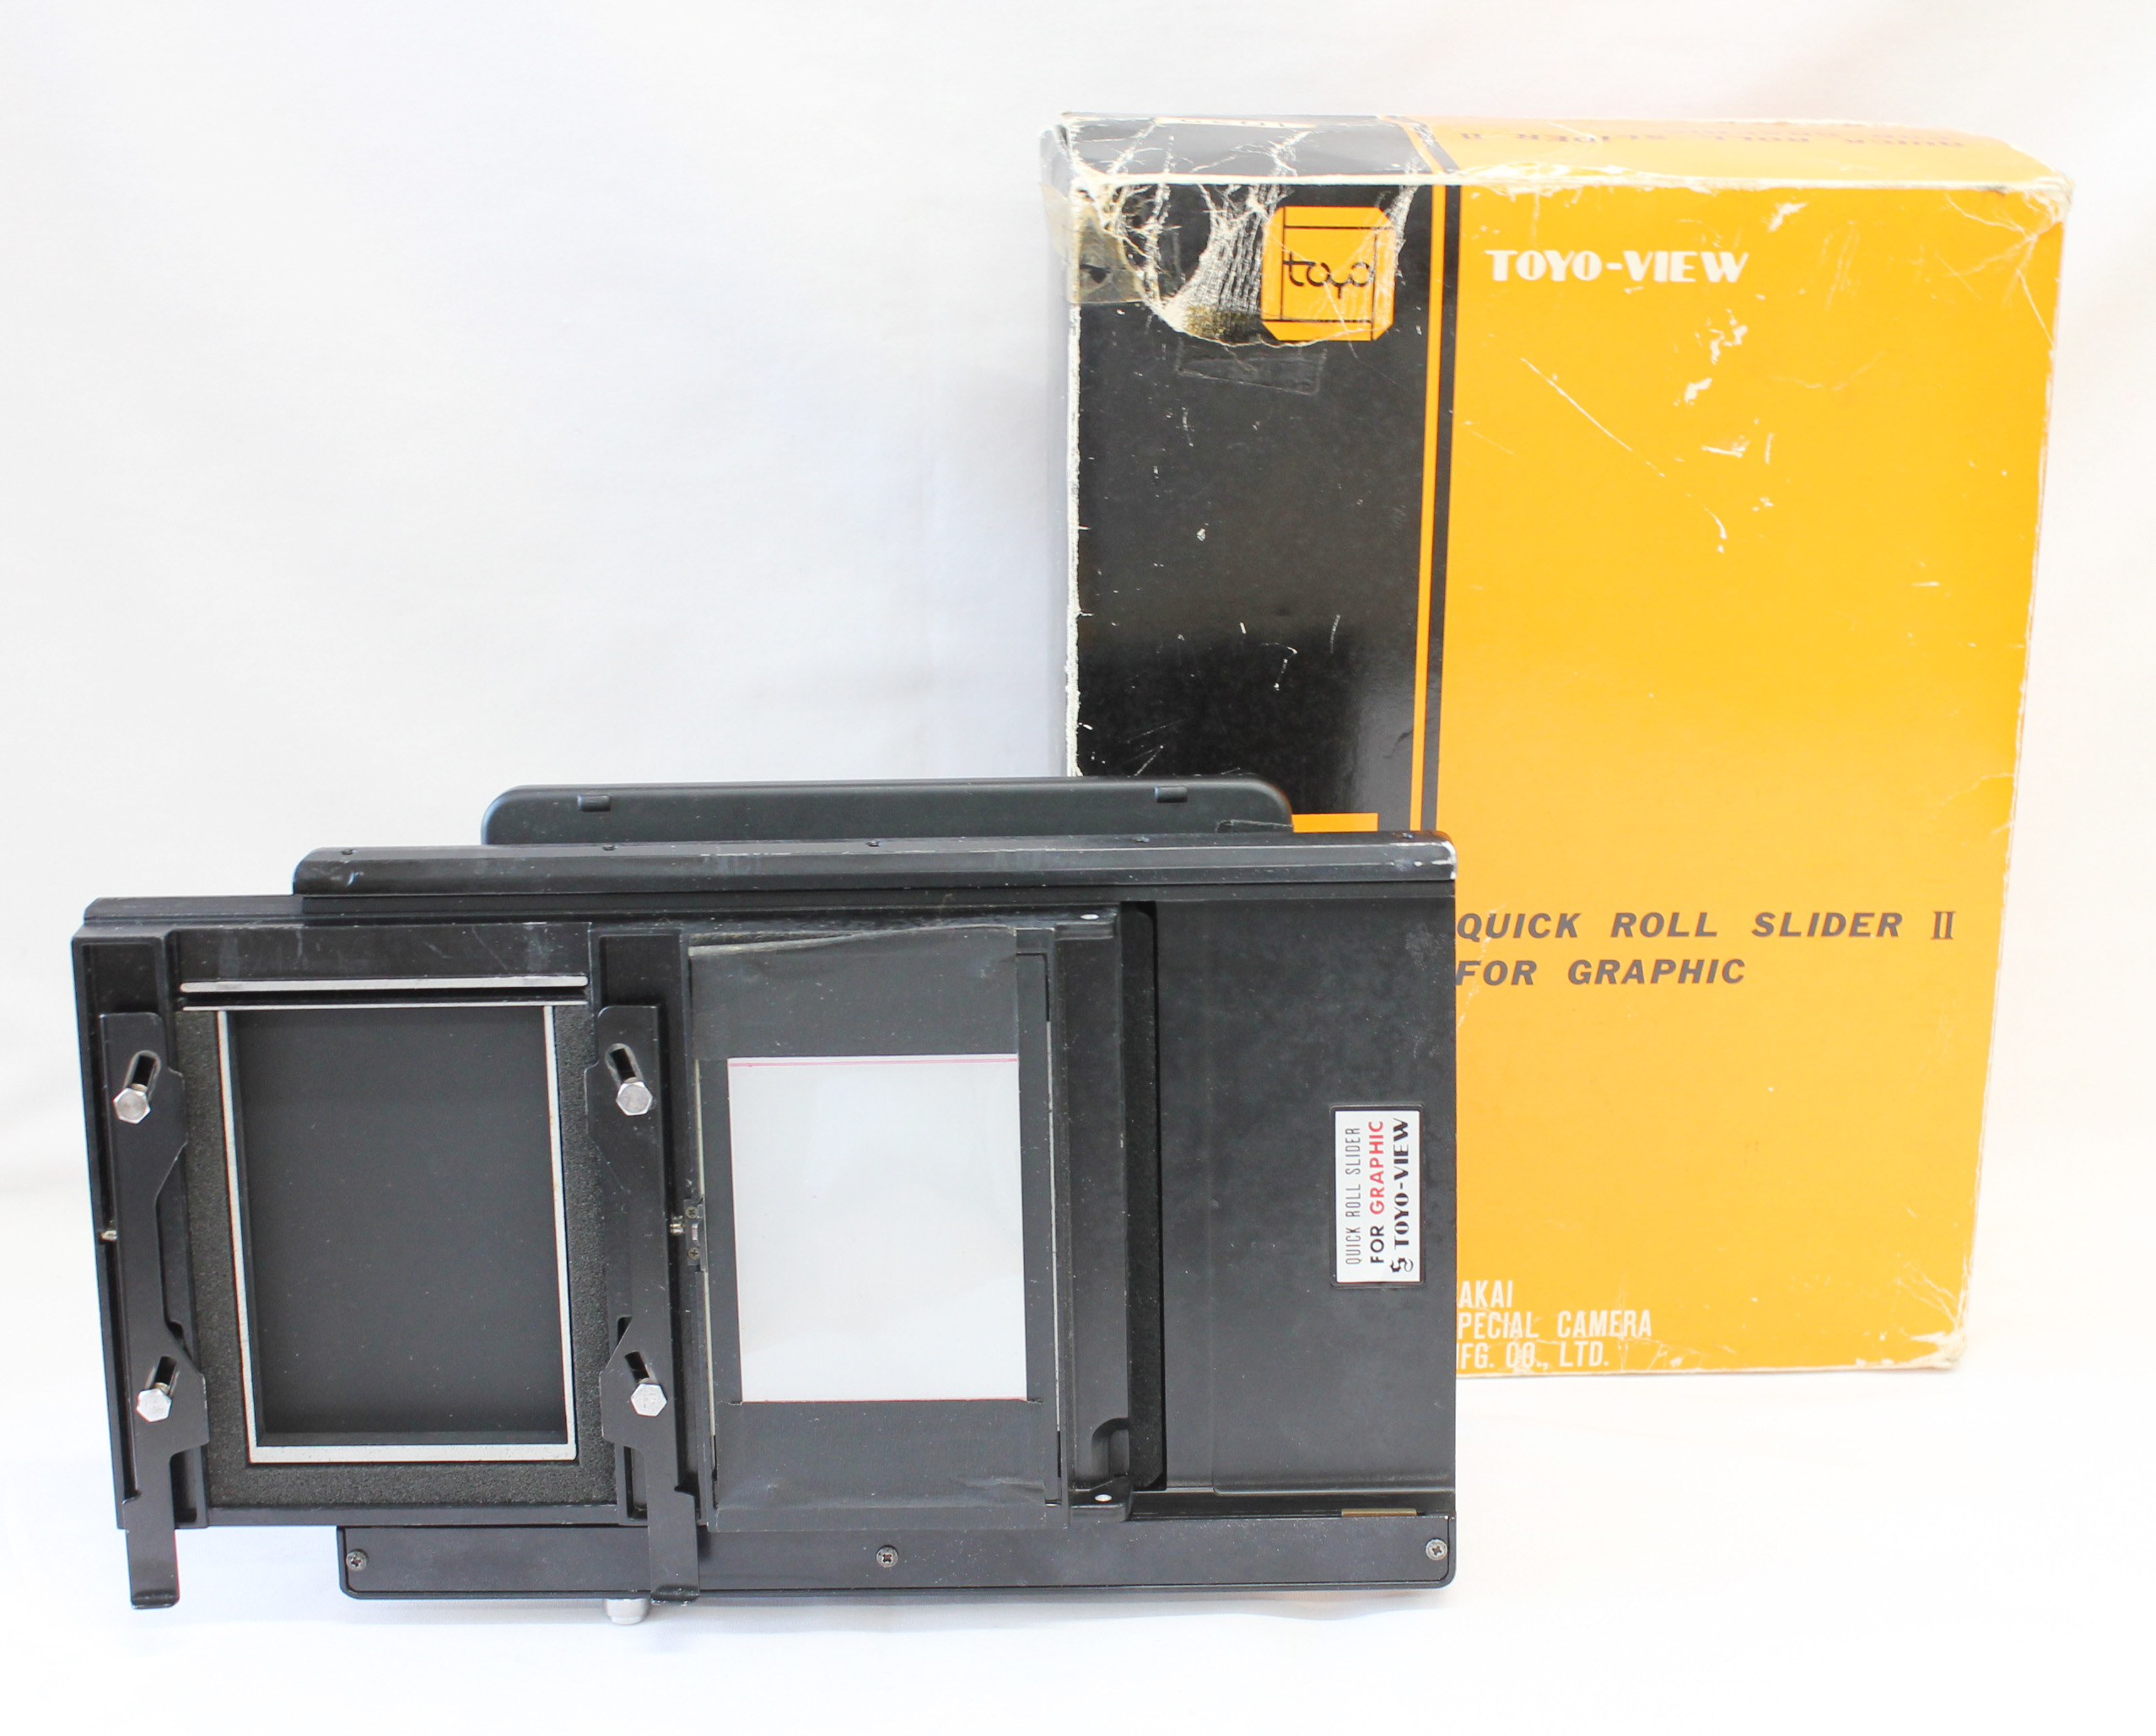 Toyo Toyo-View Quick Roll Slider II for Graphic No.1035 SG II 4V in Box from Japan